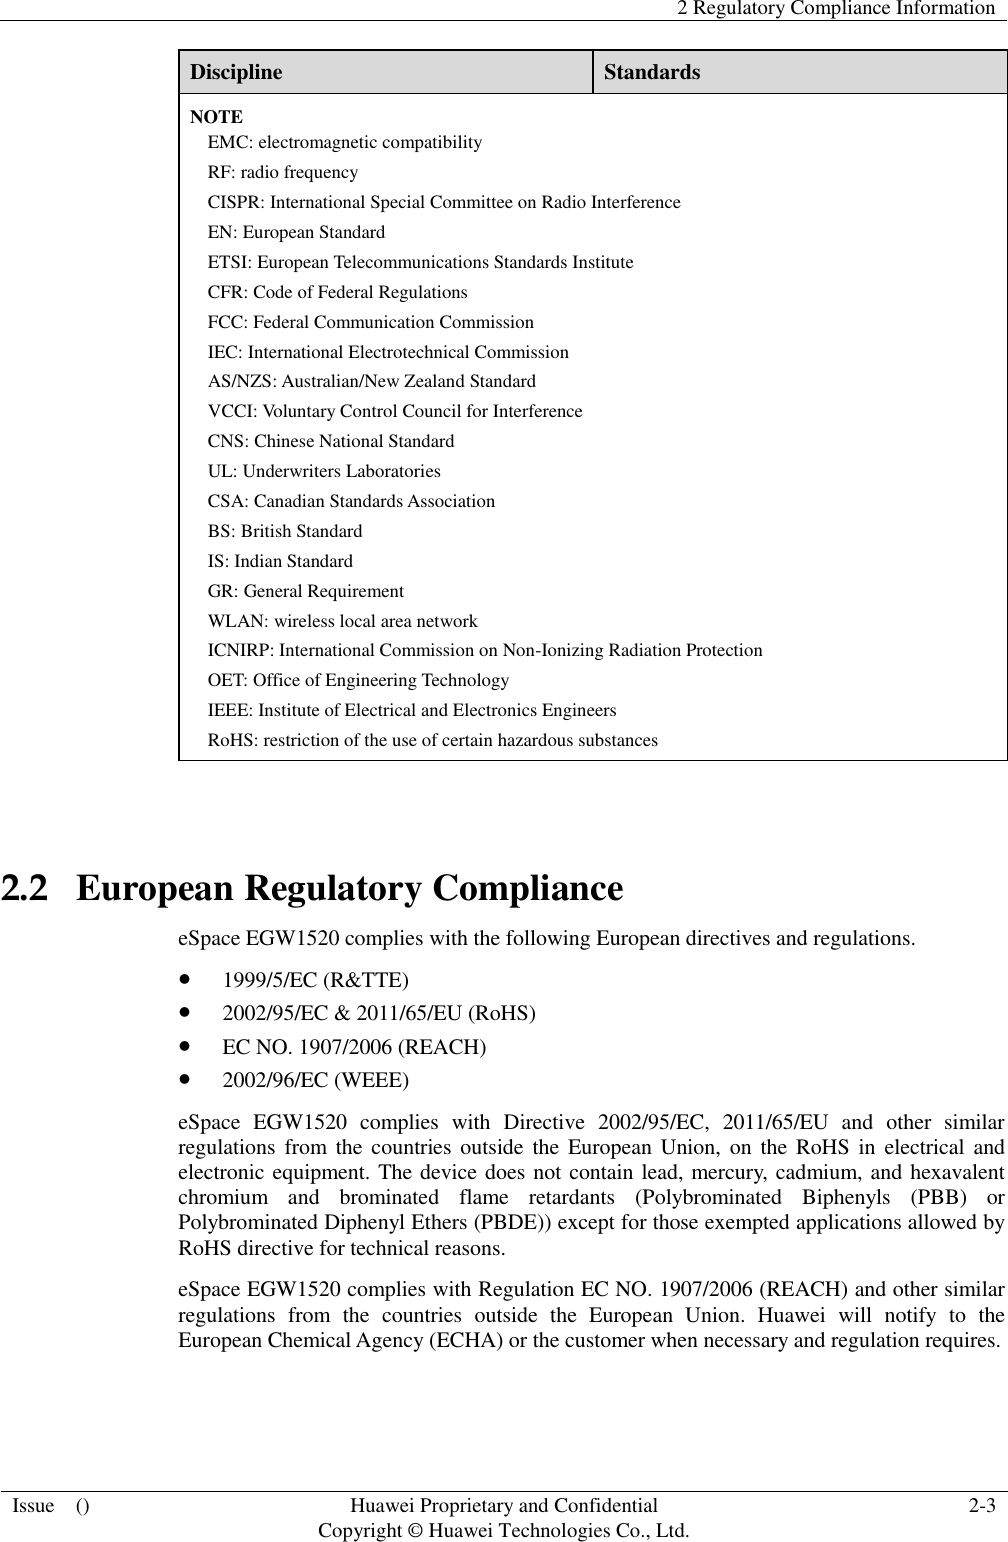   2 Regulatory Compliance Information  Issue    () Huawei Proprietary and Confidential                                     Copyright © Huawei Technologies Co., Ltd. 2-3  Discipline Standards NOTE EMC: electromagnetic compatibility RF: radio frequency CISPR: International Special Committee on Radio Interference EN: European Standard ETSI: European Telecommunications Standards Institute CFR: Code of Federal Regulations FCC: Federal Communication Commission IEC: International Electrotechnical Commission AS/NZS: Australian/New Zealand Standard VCCI: Voluntary Control Council for Interference CNS: Chinese National Standard UL: Underwriters Laboratories CSA: Canadian Standards Association BS: British Standard IS: Indian Standard GR: General Requirement WLAN: wireless local area network ICNIRP: International Commission on Non-Ionizing Radiation Protection OET: Office of Engineering Technology IEEE: Institute of Electrical and Electronics Engineers RoHS: restriction of the use of certain hazardous substances  2.2   European Regulatory Compliance eSpace EGW1520 complies with the following European directives and regulations.  1999/5/EC (R&amp;TTE)  2002/95/EC &amp; 2011/65/EU (RoHS)  EC NO. 1907/2006 (REACH)  2002/96/EC (WEEE) eSpace  EGW1520  complies  with  Directive  2002/95/EC,  2011/65/EU  and  other  similar regulations from  the  countries  outside  the  European Union, on the RoHS in  electrical and electronic equipment. The device does not contain lead, mercury, cadmium, and hexavalent chromium  and  brominated  flame  retardants  (Polybrominated  Biphenyls  (PBB)  or Polybrominated Diphenyl Ethers (PBDE)) except for those exempted applications allowed by RoHS directive for technical reasons.   eSpace EGW1520 complies with Regulation EC NO. 1907/2006 (REACH) and other similar regulations  from  the  countries  outside  the  European  Union.  Huawei  will  notify  to  the European Chemical Agency (ECHA) or the customer when necessary and regulation requires.  